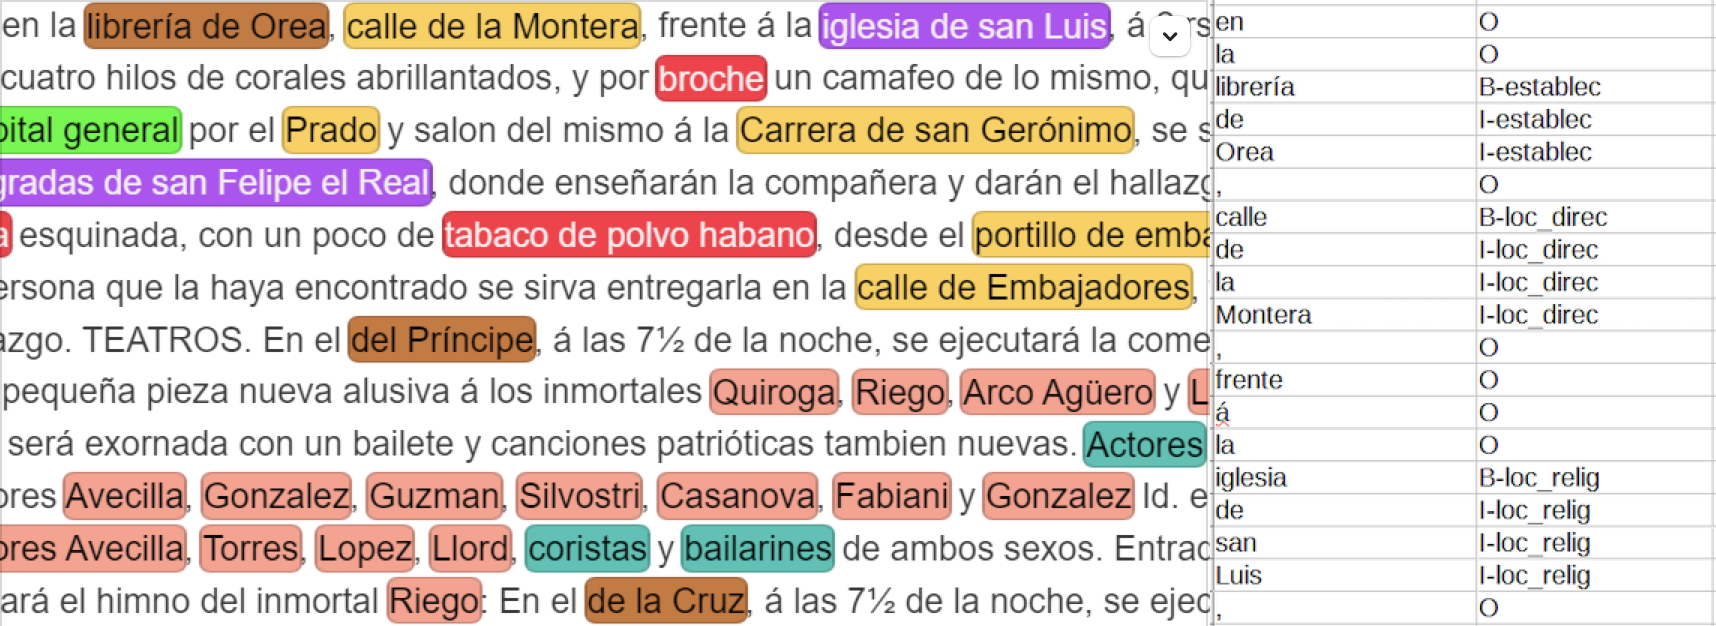 A text sample with words and phrases tagged in many colors on the left,
                     juxtaposed with a table of tagged words and their corresponding categories on
                     the right.